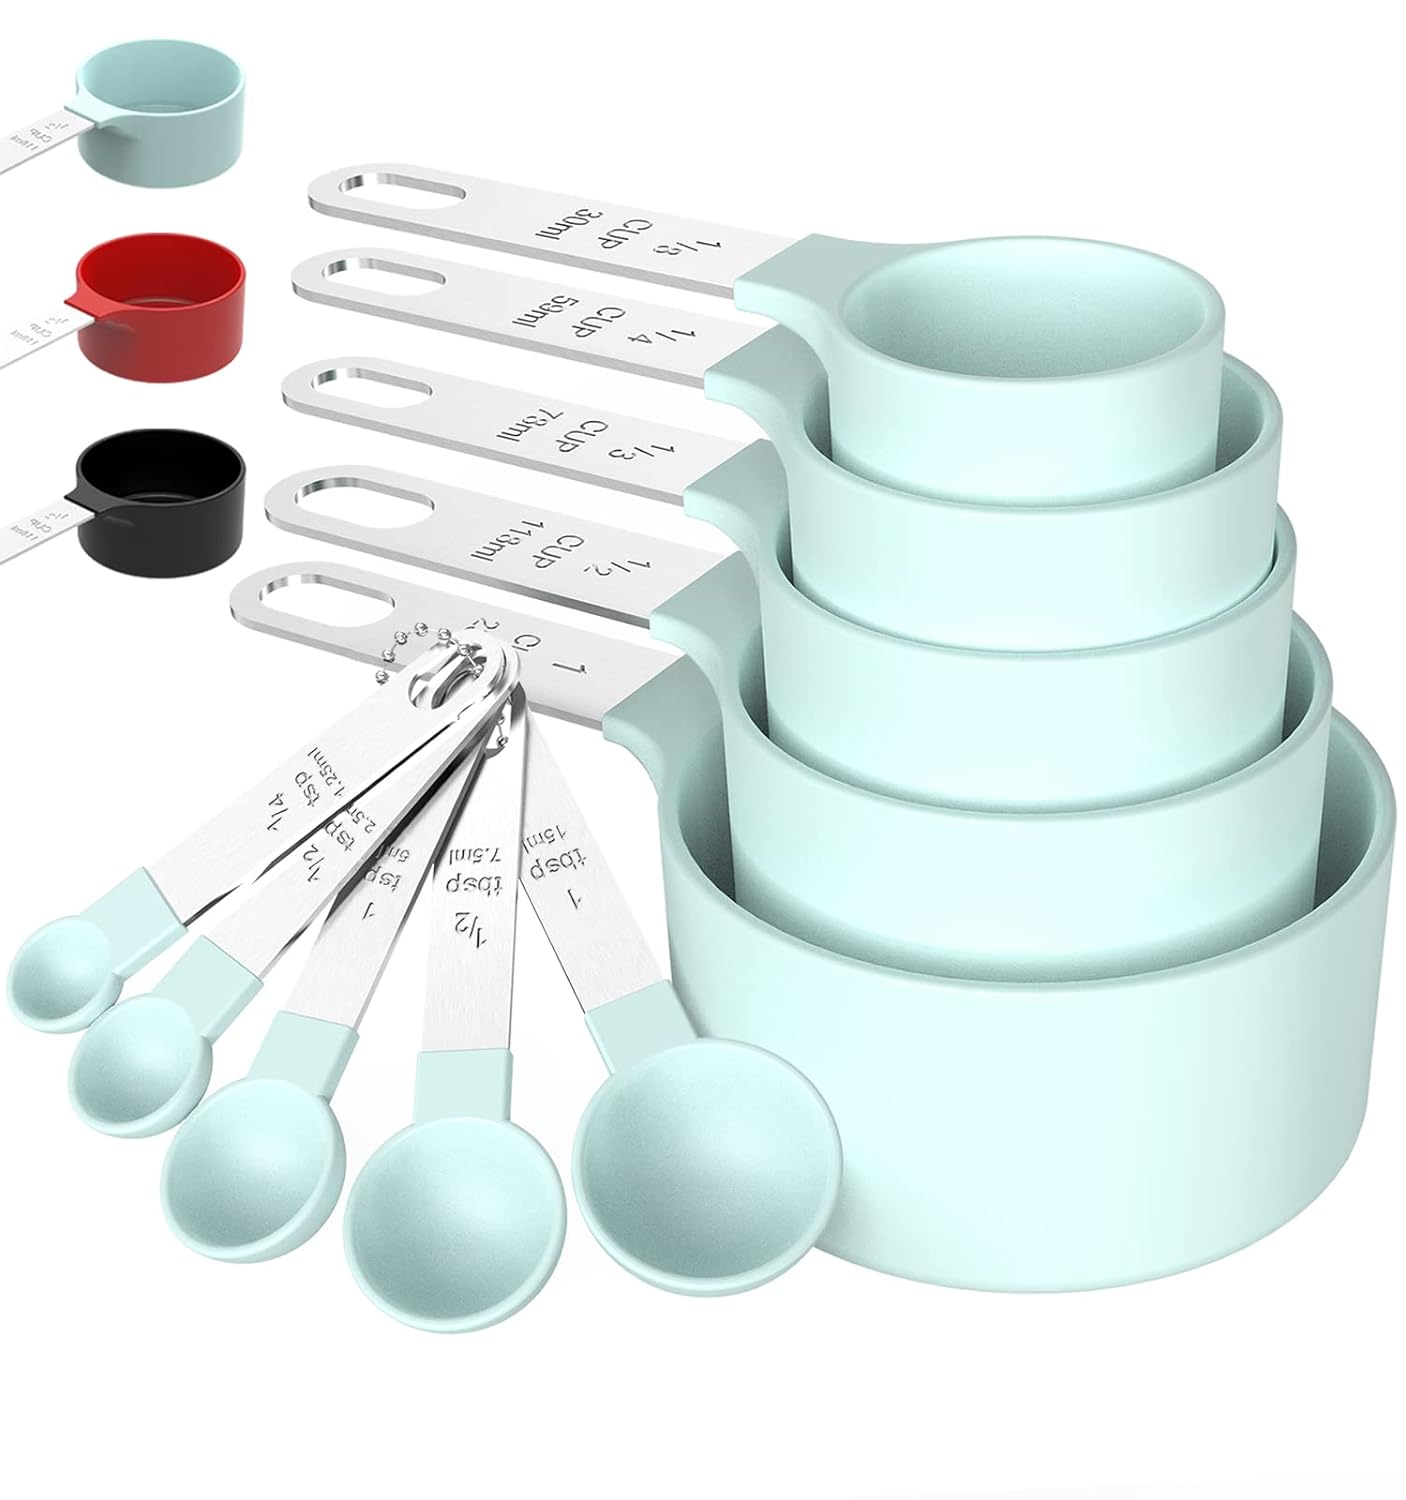 TILUCK Measuring Cups & Spoons Set, Stackable Cups and Spoons, Nesting Measure Cups with Stainless Steel Handle, Kitchen Gadgets for Cooking & Baking (Green)